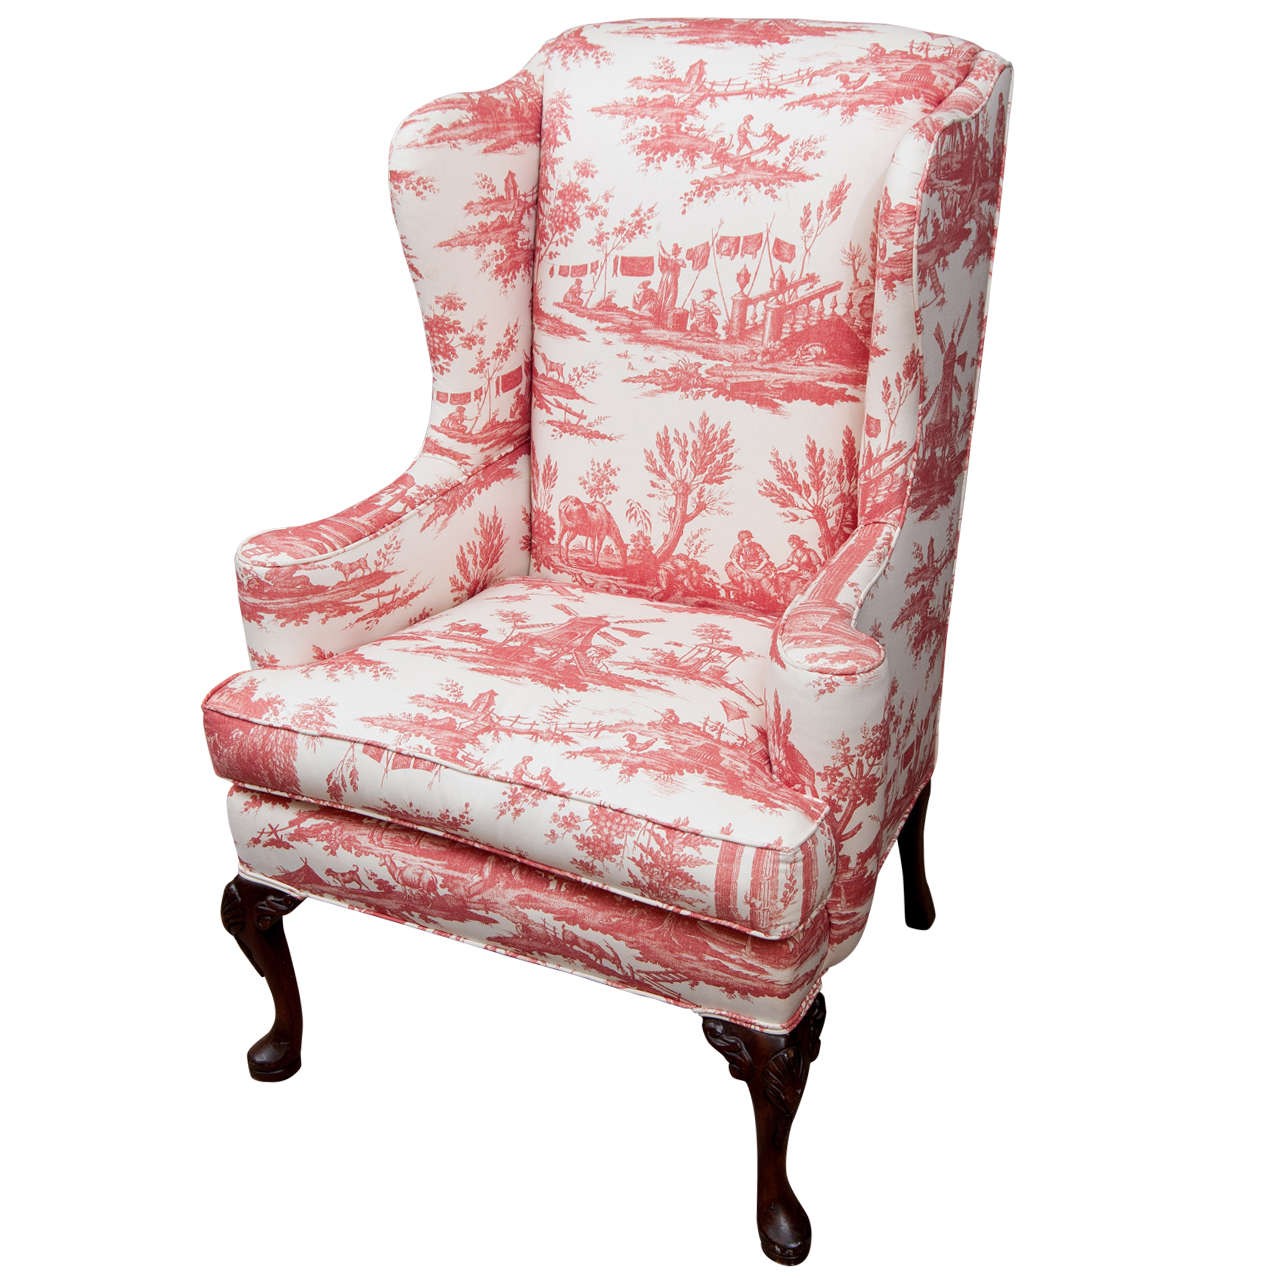 Queen anne chair and the antique sense of it 3288